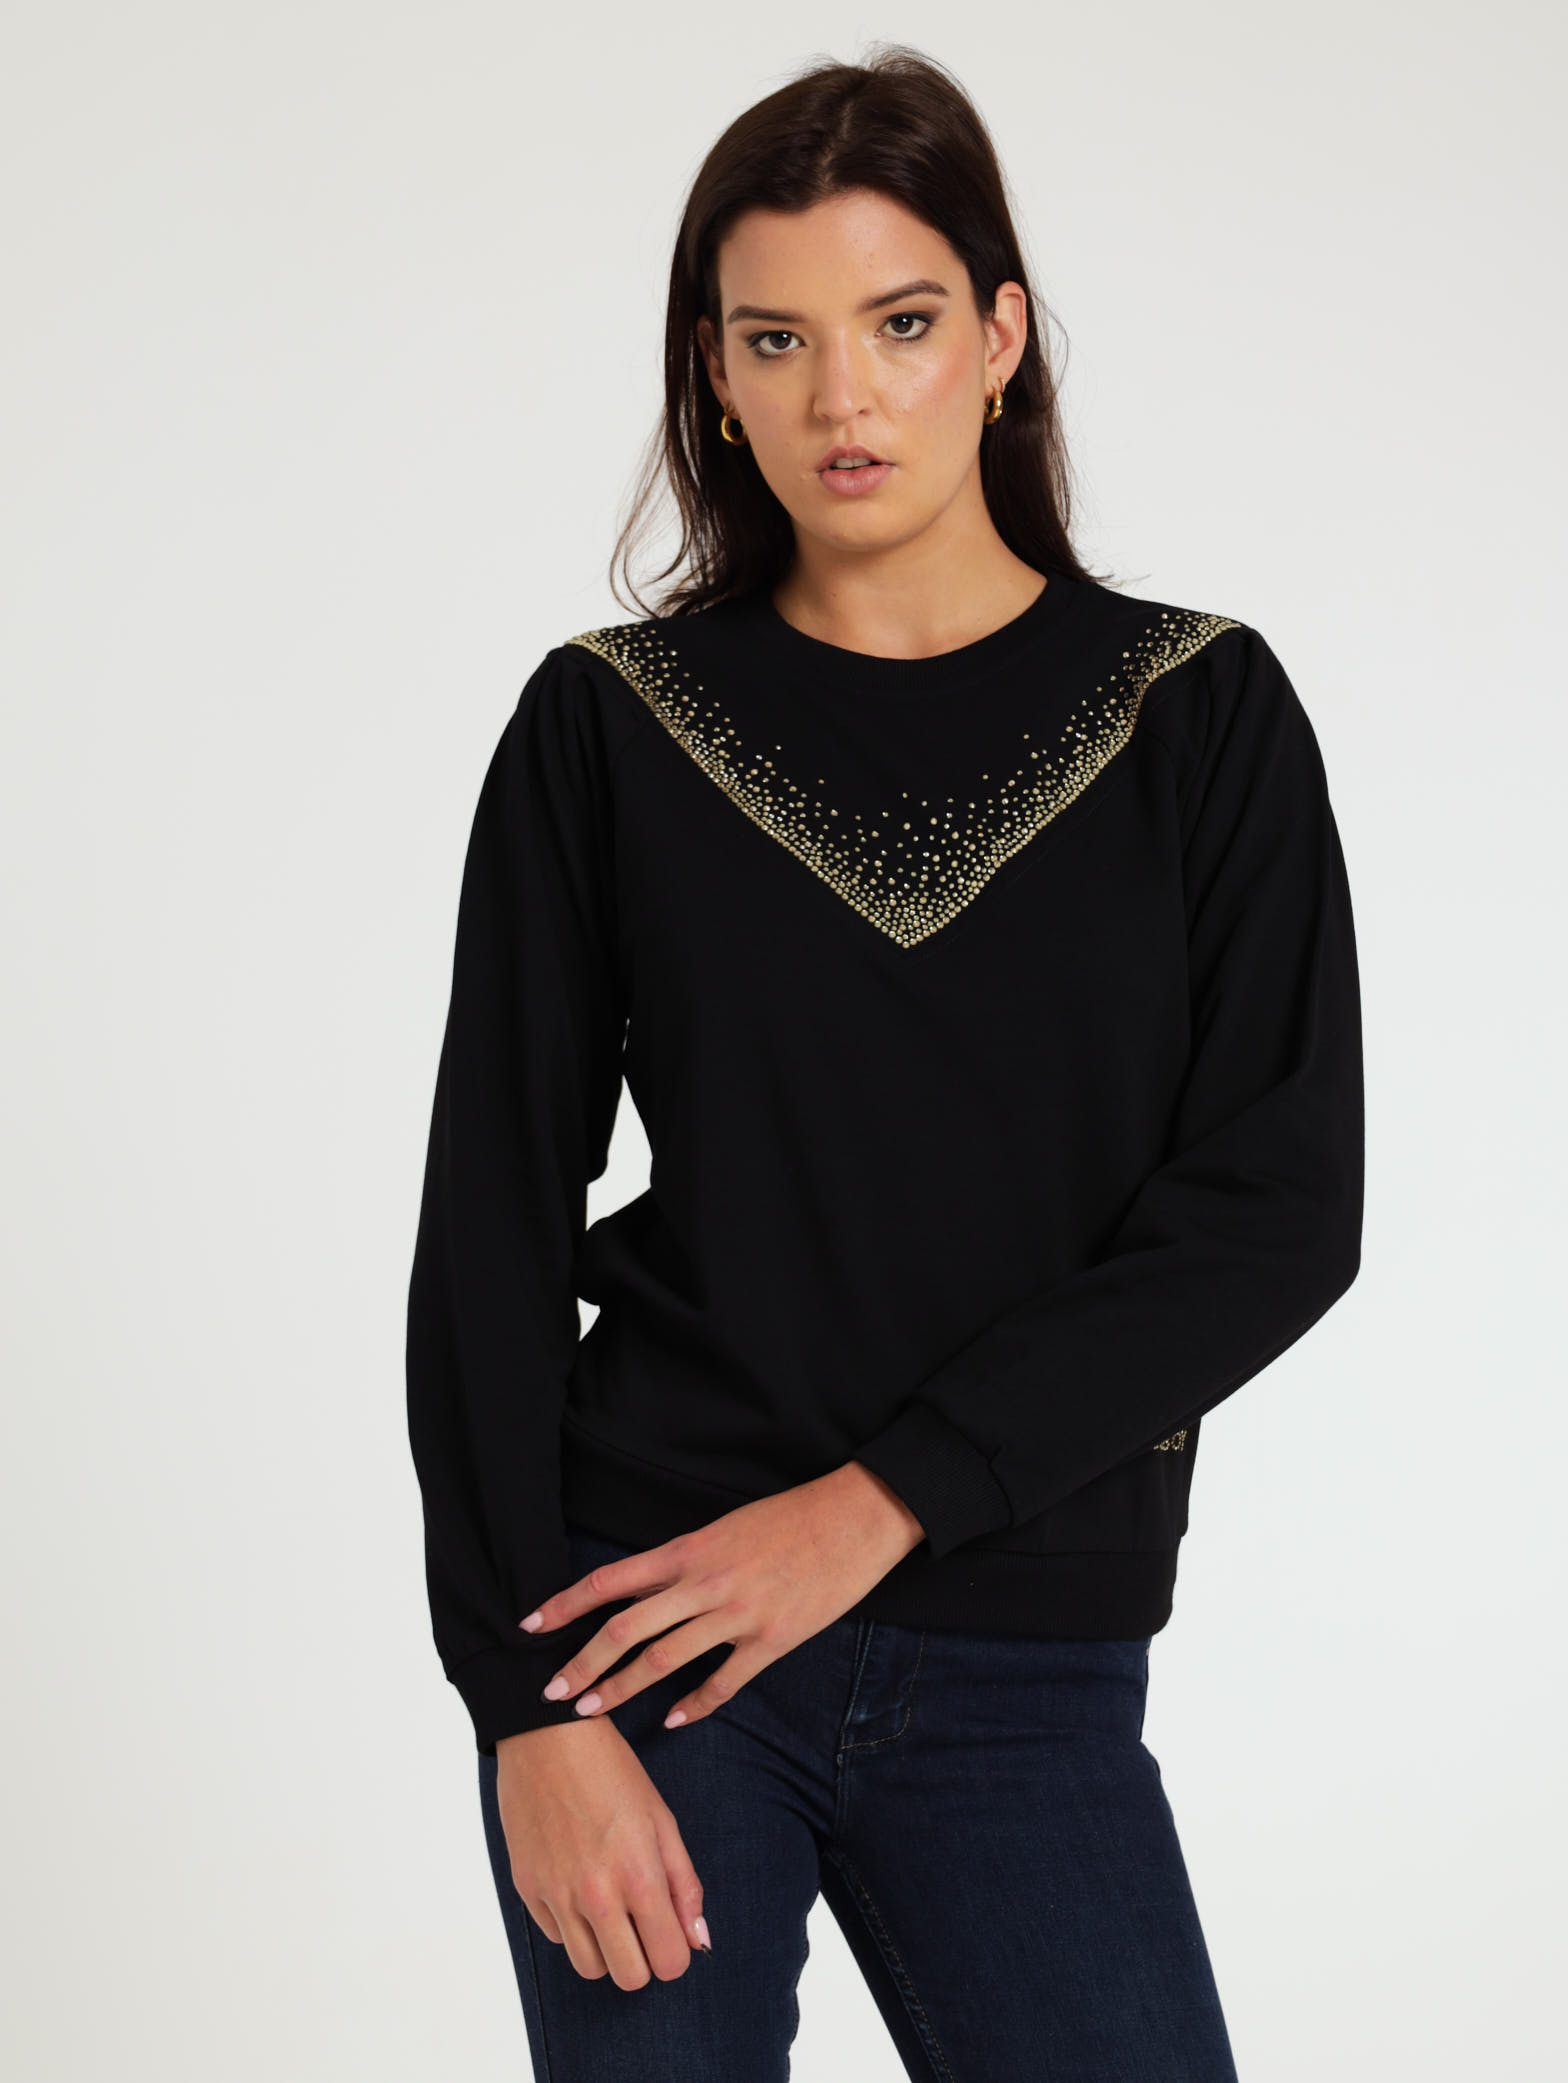 Sweat Top With Puff Sleeves - Black